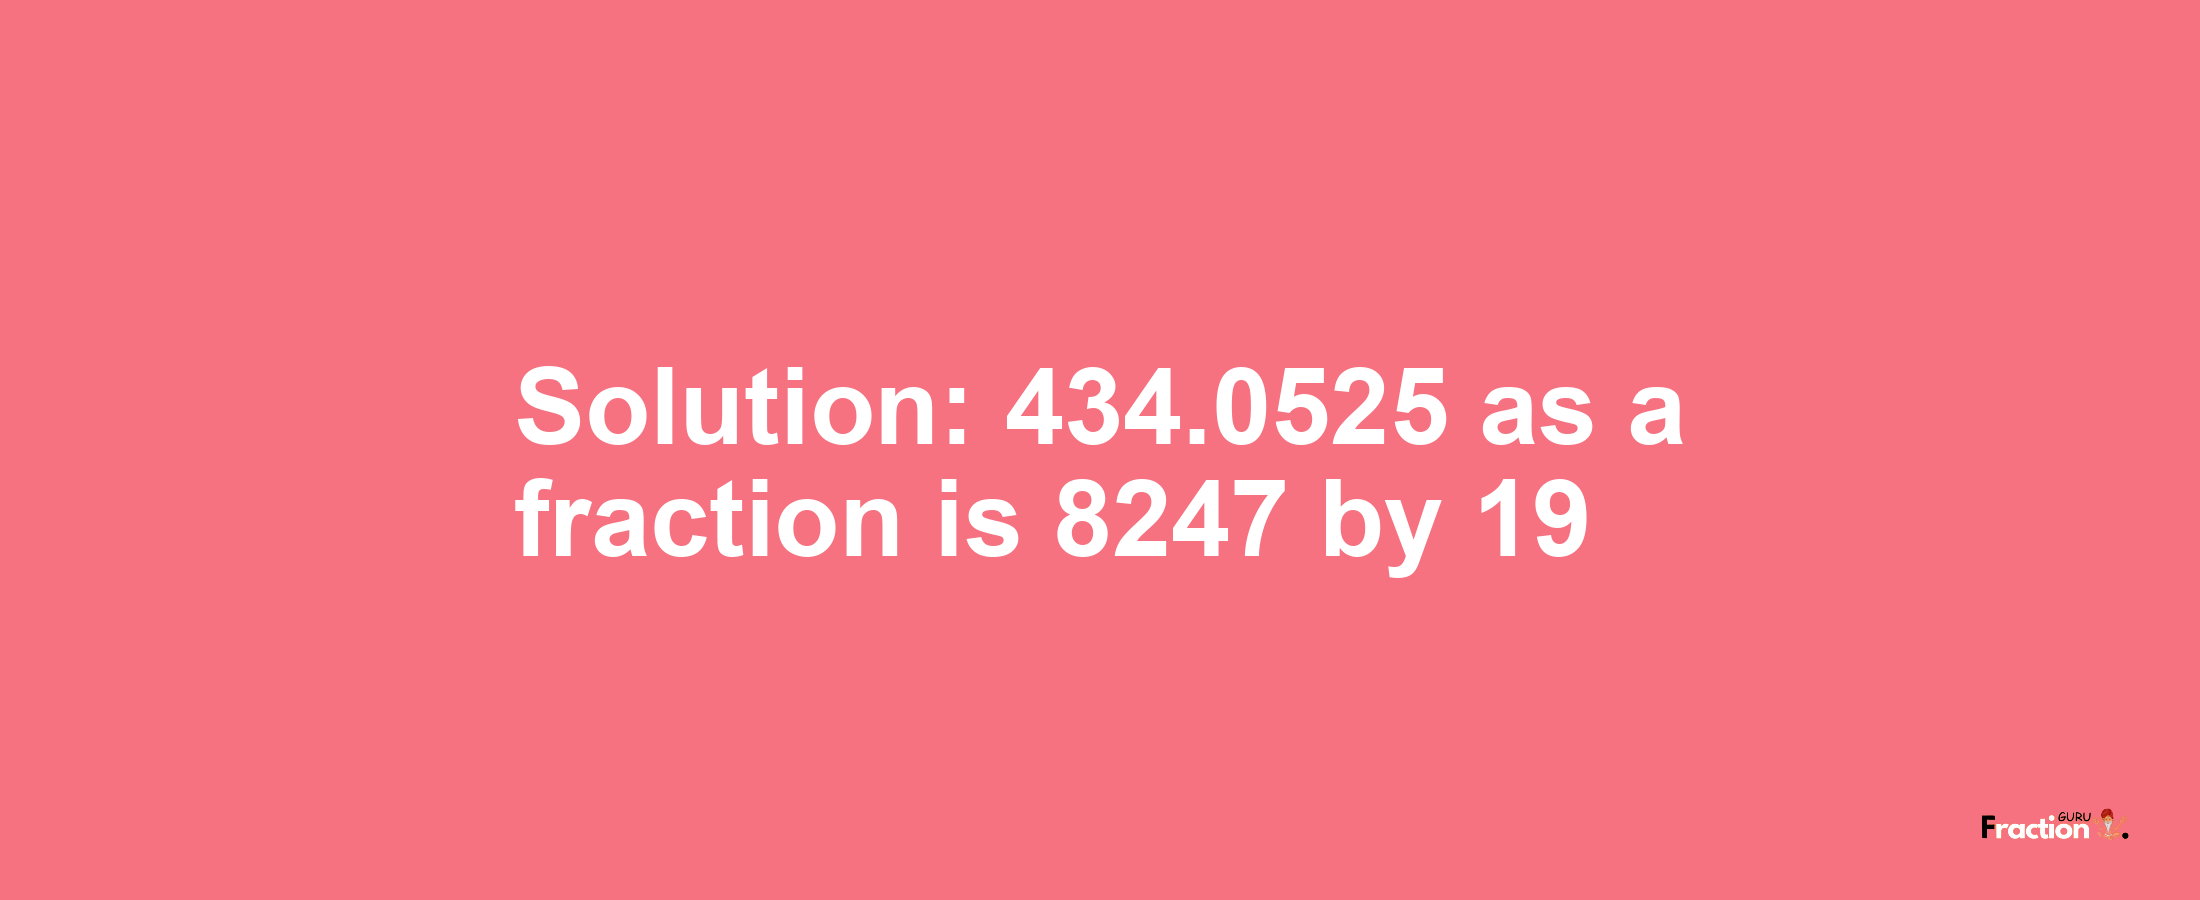 Solution:434.0525 as a fraction is 8247/19